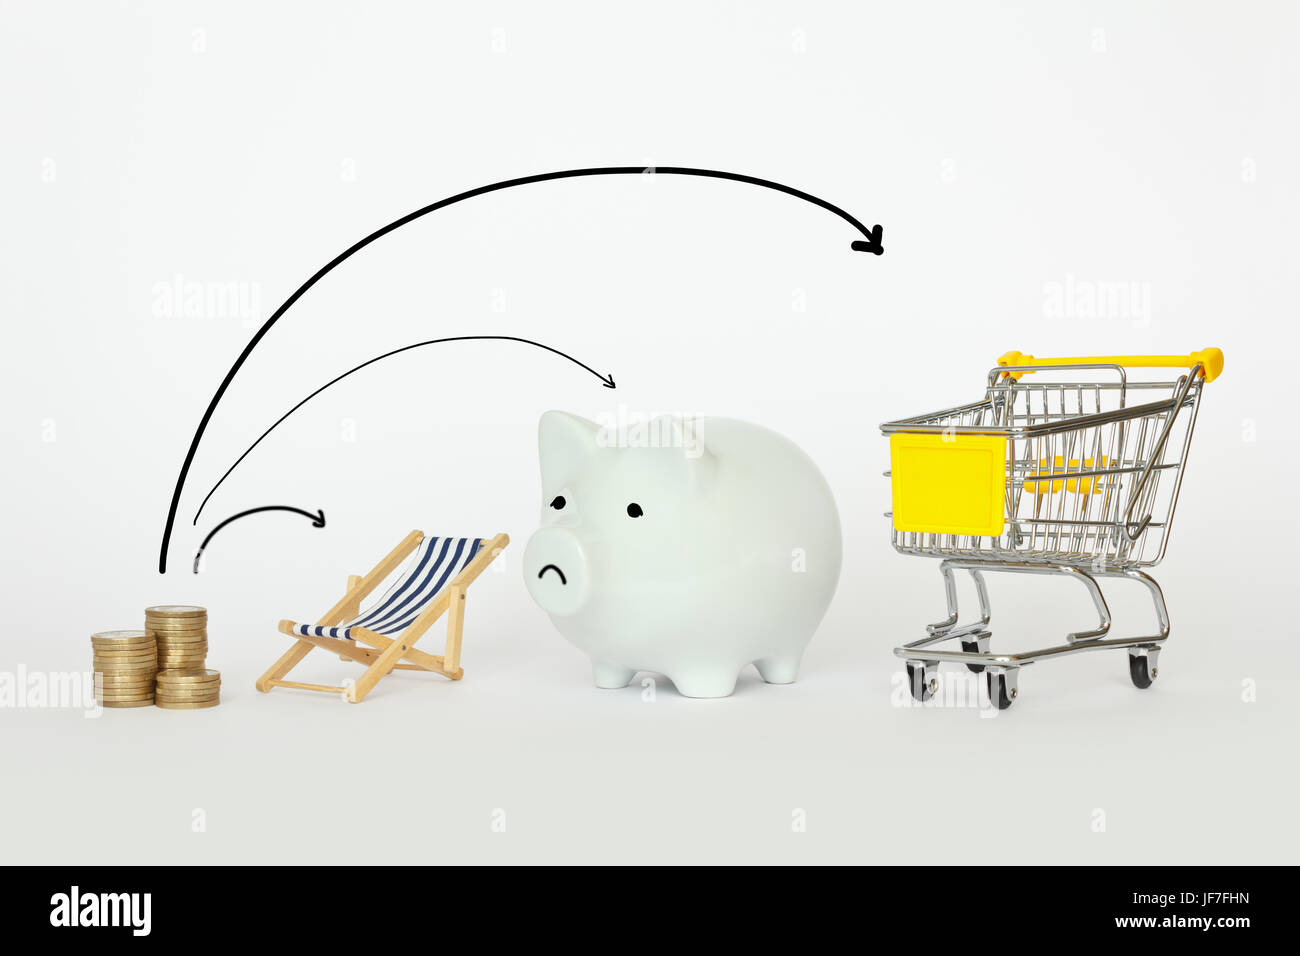 A stack of coins with a deck chair, piggy bank and a shopping trolley with 3 arrows, symbolic for distributing income, earnings or revenue money for h Stock Photo